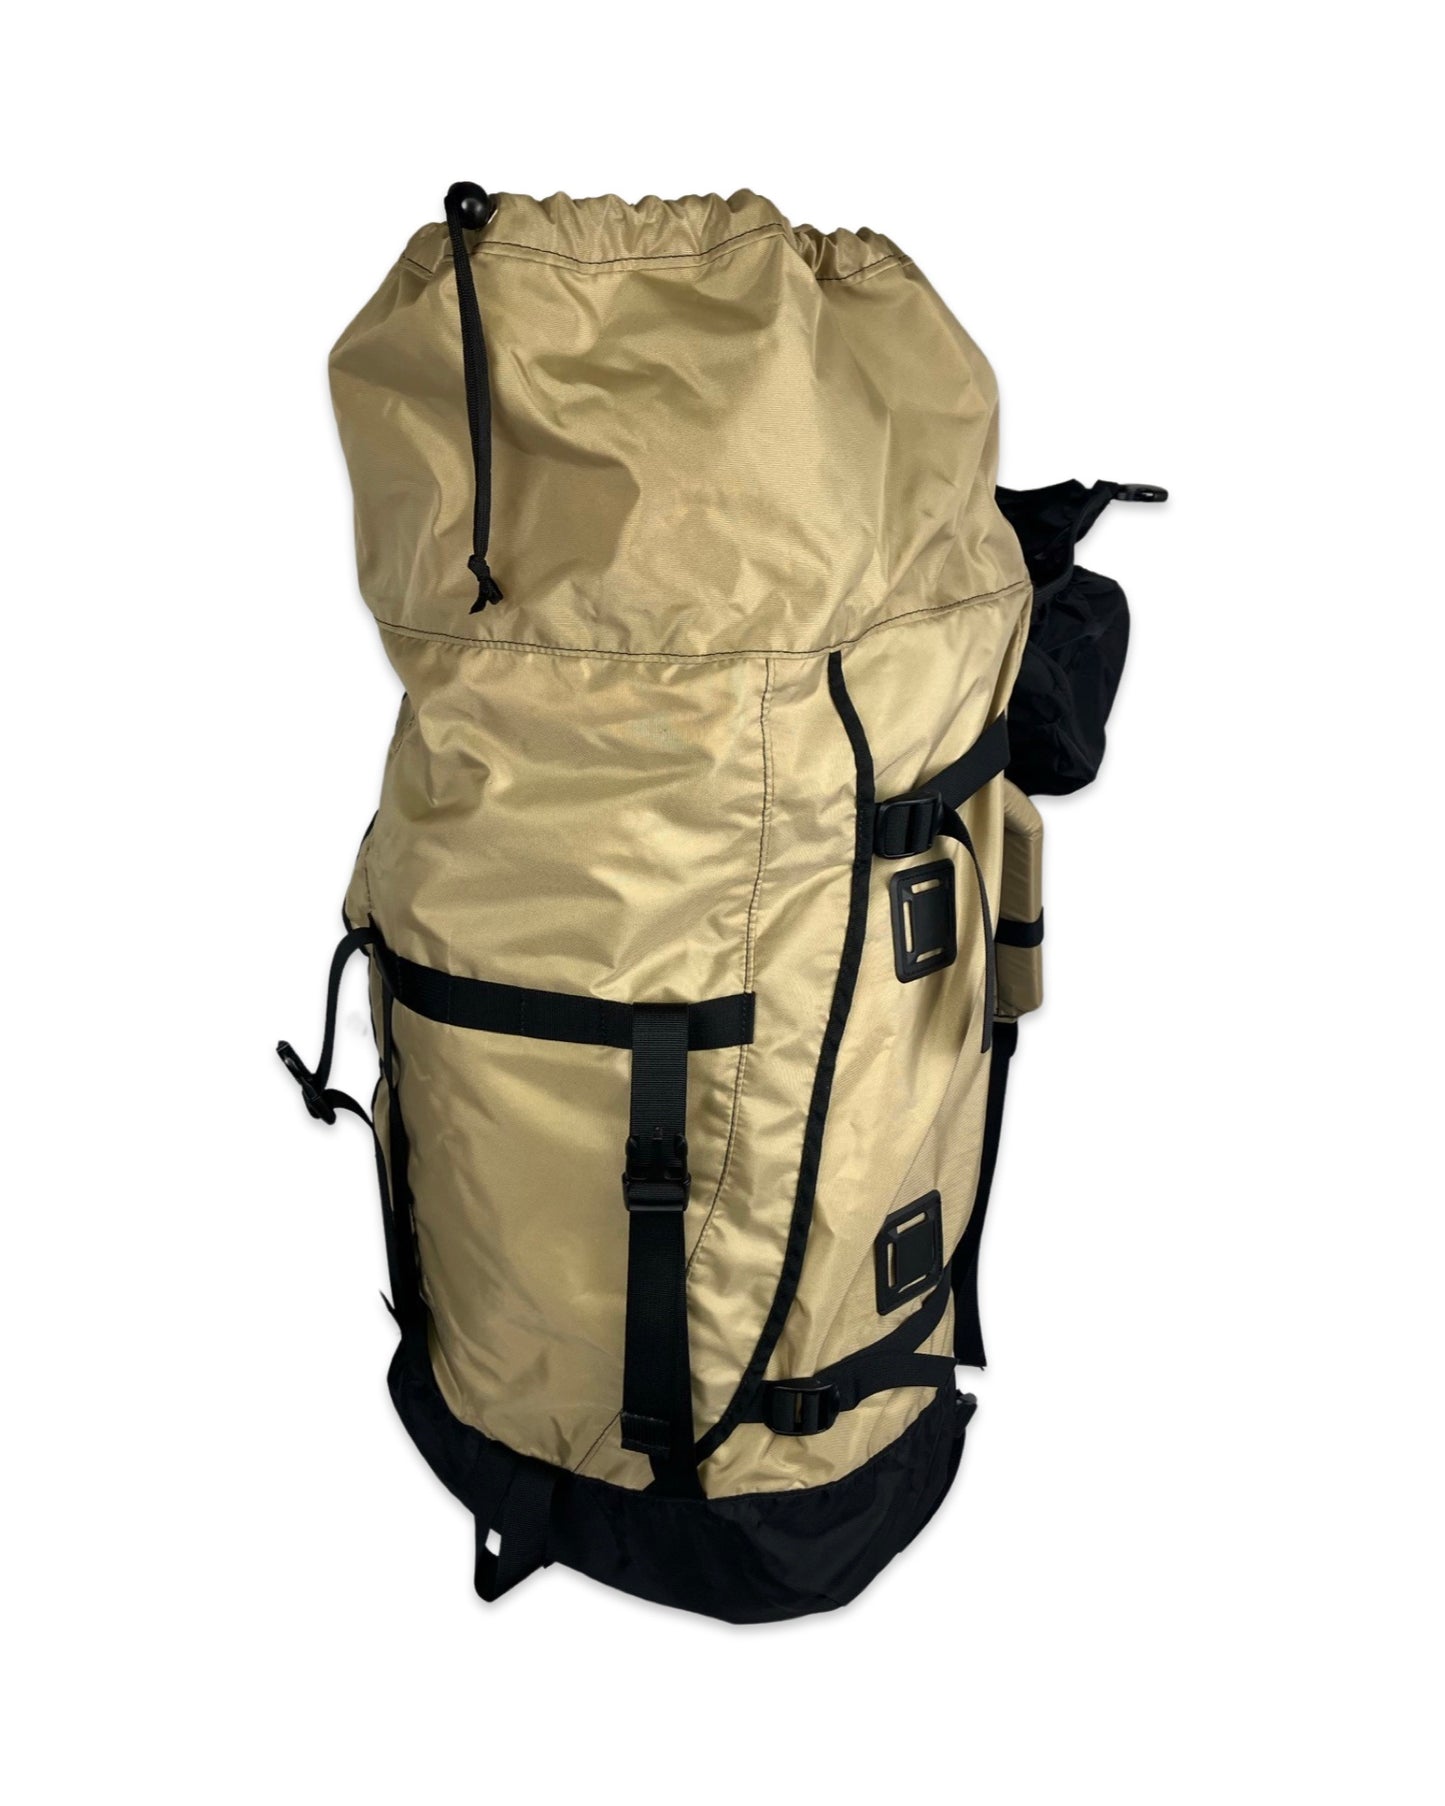 CARRIER PACK Backpacks, by Tough Traveler. Made in USA since 1970